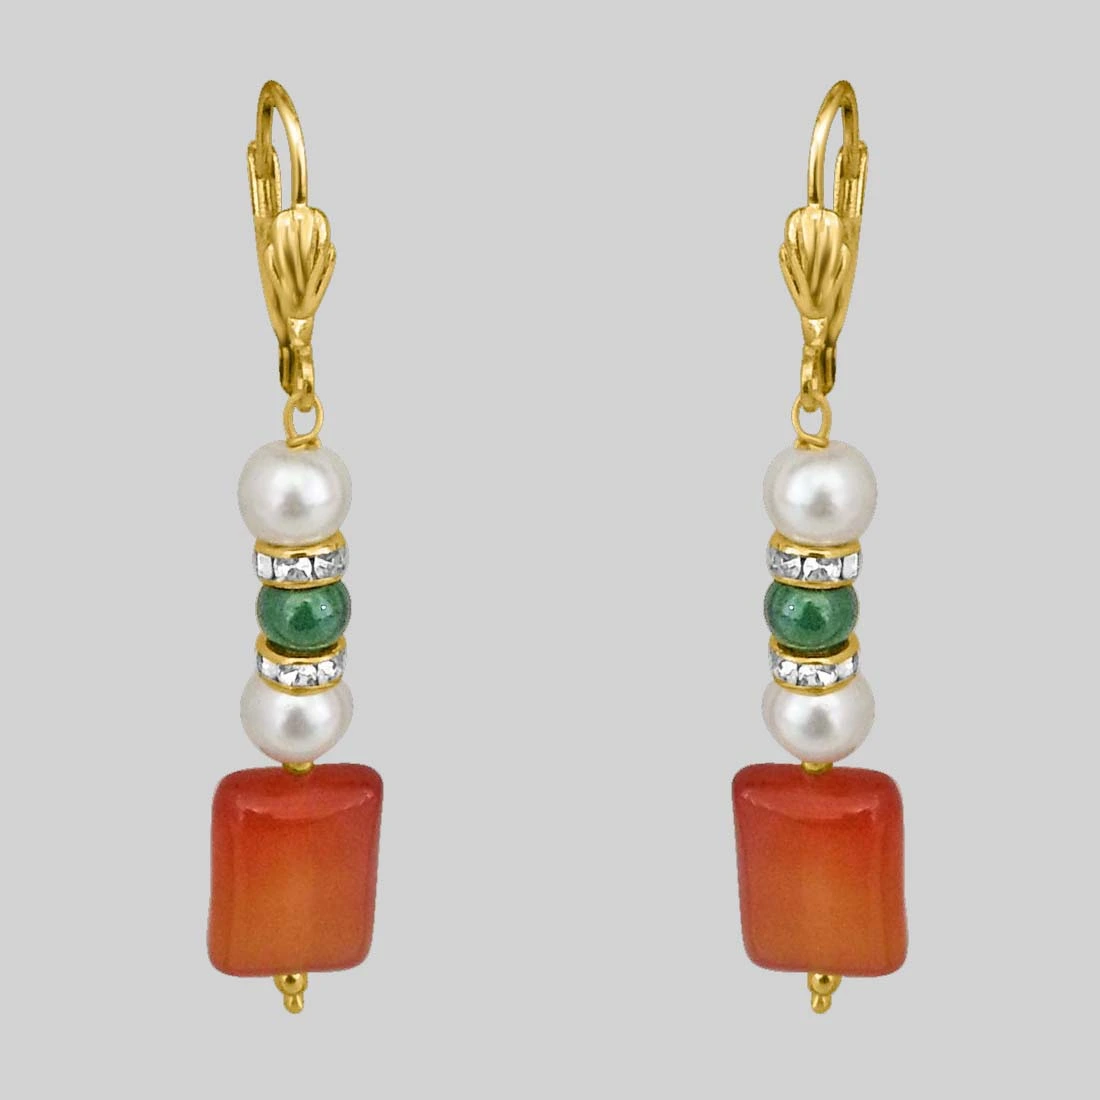 Just For You - Red Onyx, Shell Pearl & Green Coloured Stone Earring (SE182)